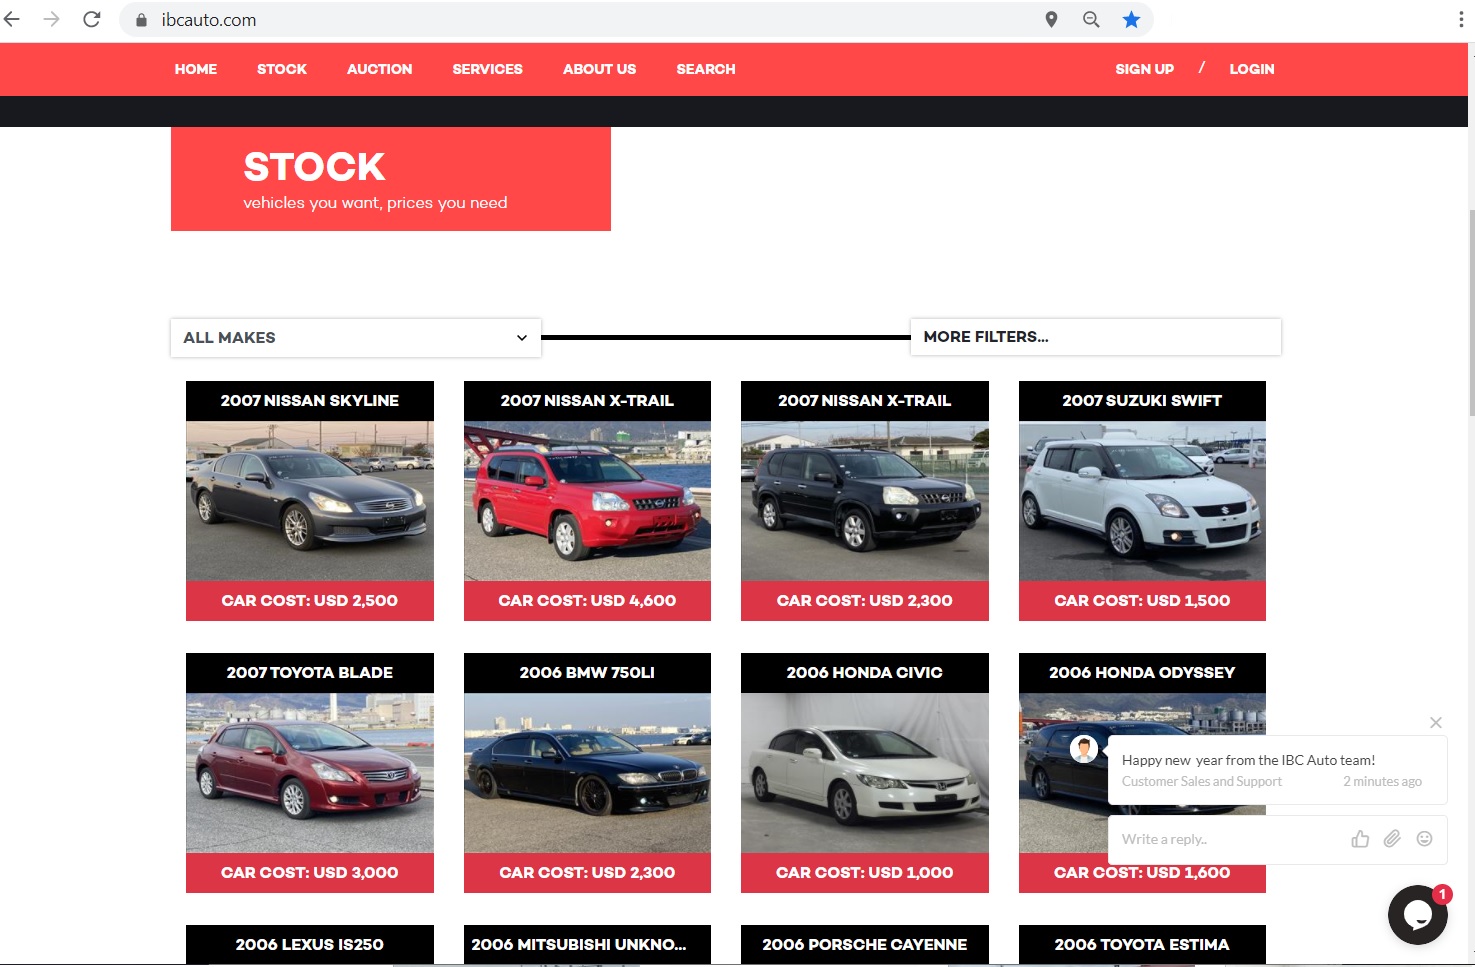 Homepage Now Have Car Search Function